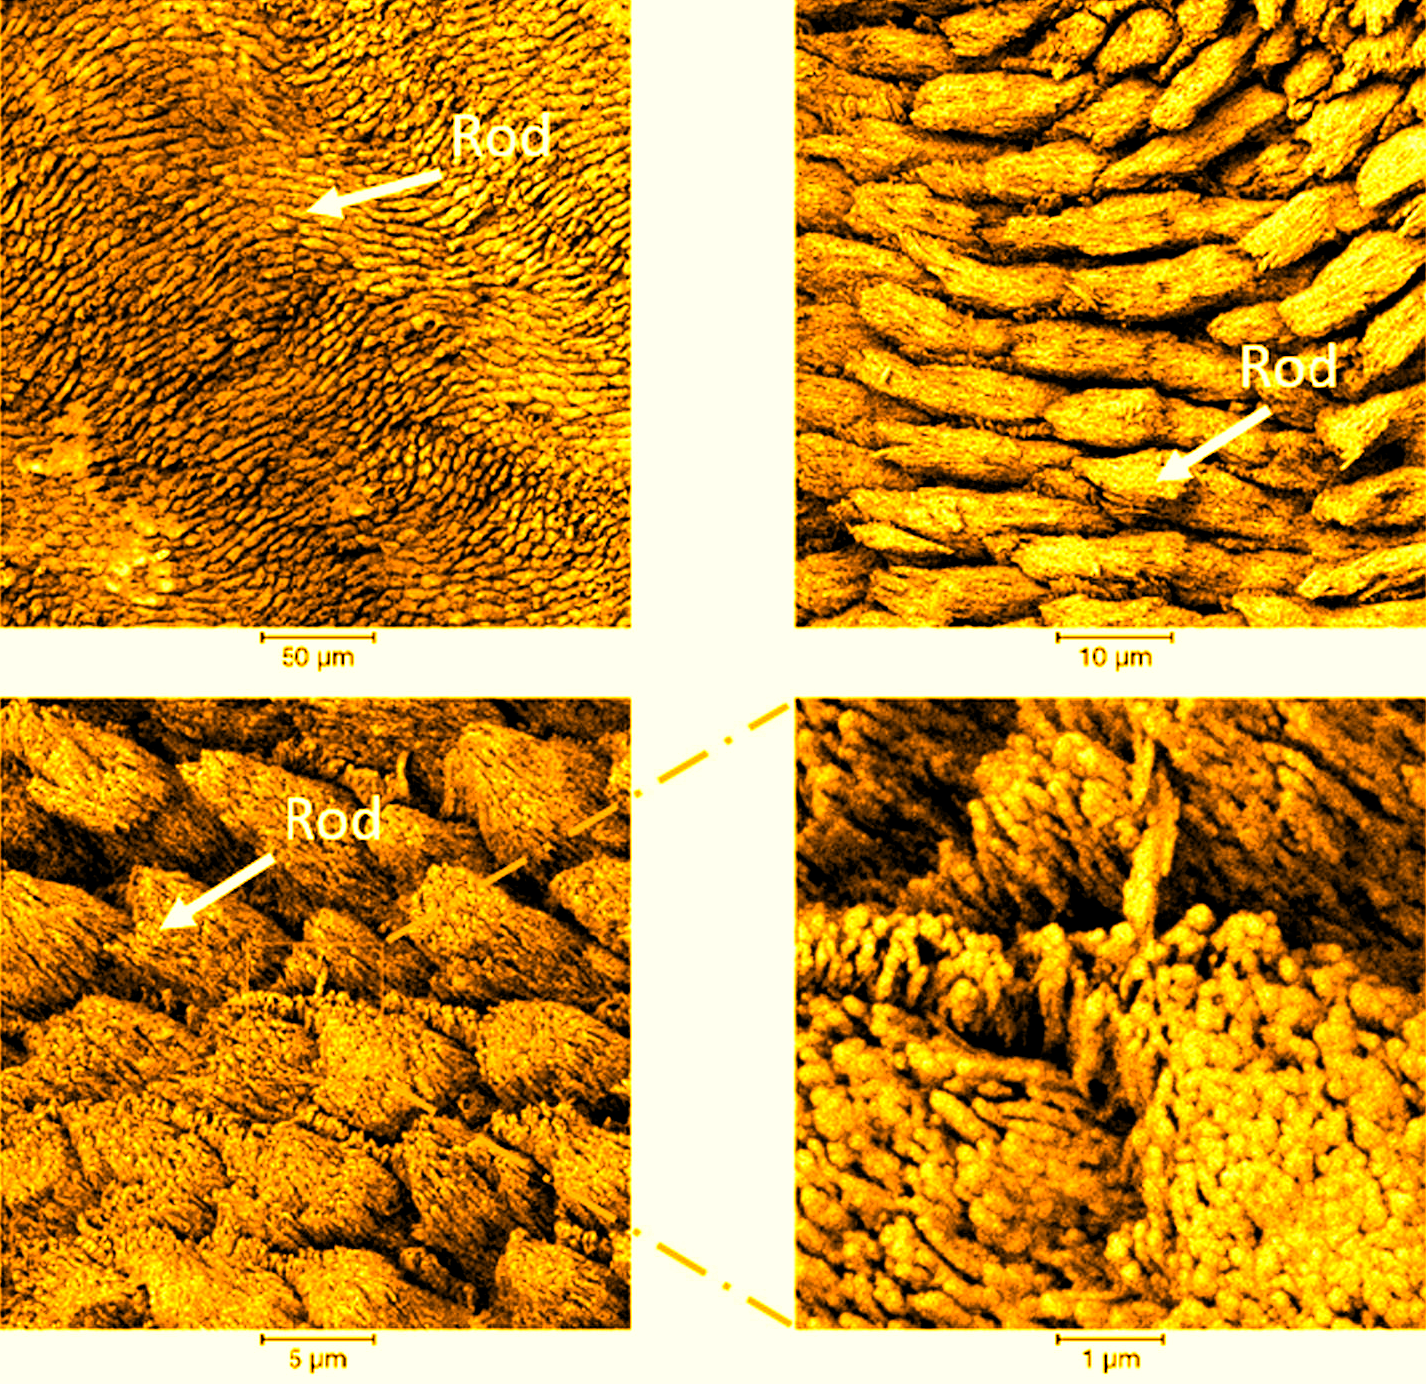 Multiple resolution SEM imaging of carious enamel surface showing the hierarchical structure of rods formed by bundles of hydroxyapatite nanocrystals. <br/>Image: Cyril besnard et al. https://doi.org/10.1016/j.matdes.2021.109739 <br/>